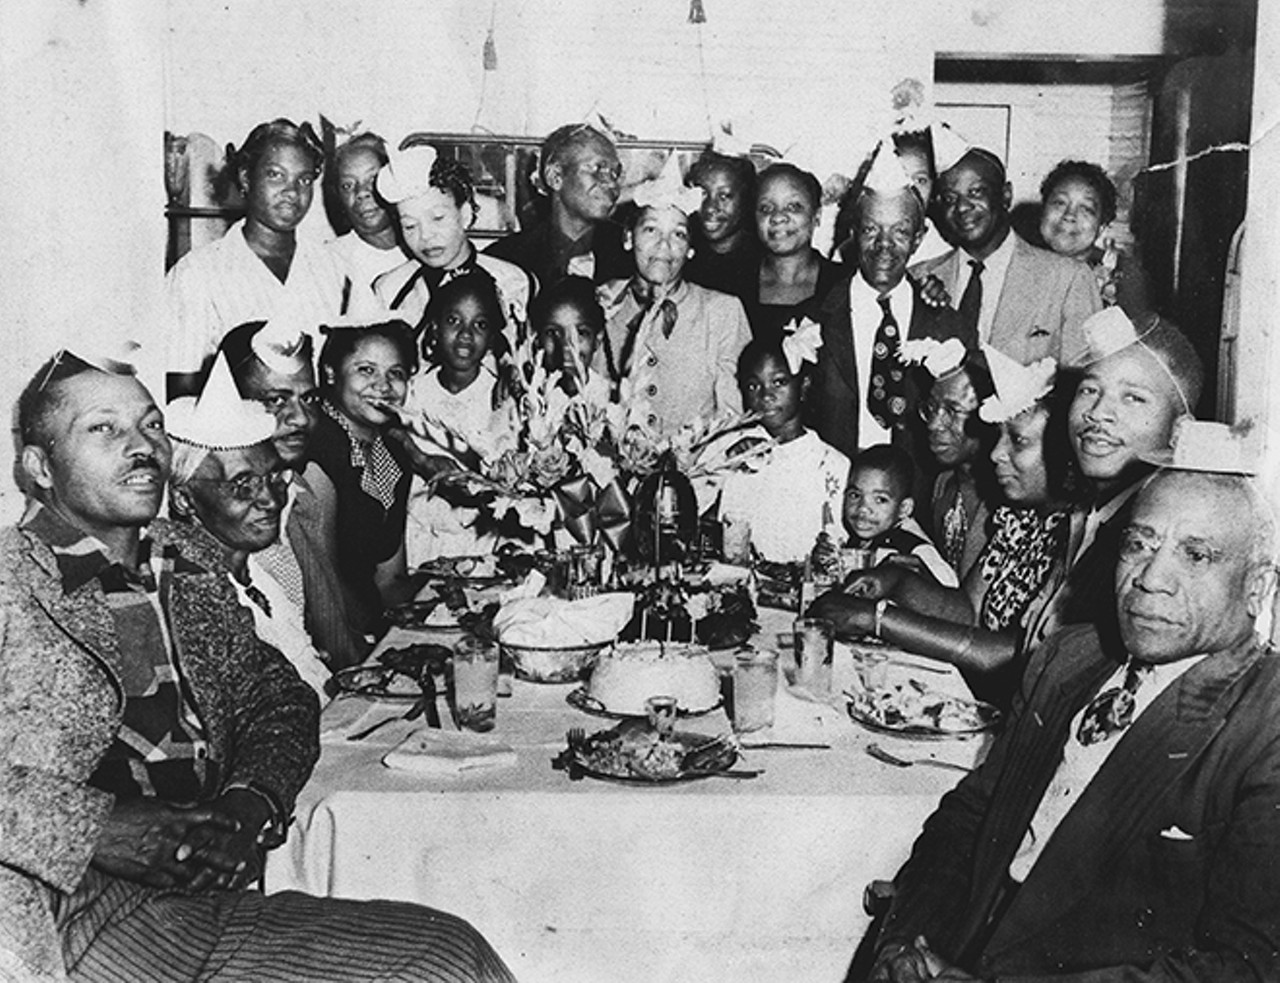 The Vereen family celebrates a birthday at their home. Eddie Vereen is seated at the rear right corner of the table with his grandson Reginald Lewis in his lap. Arizona Vereen-Turner is standing near the rear left corner. By permission of Henry Jones. Reprinted with permission of the University Press of Florida.